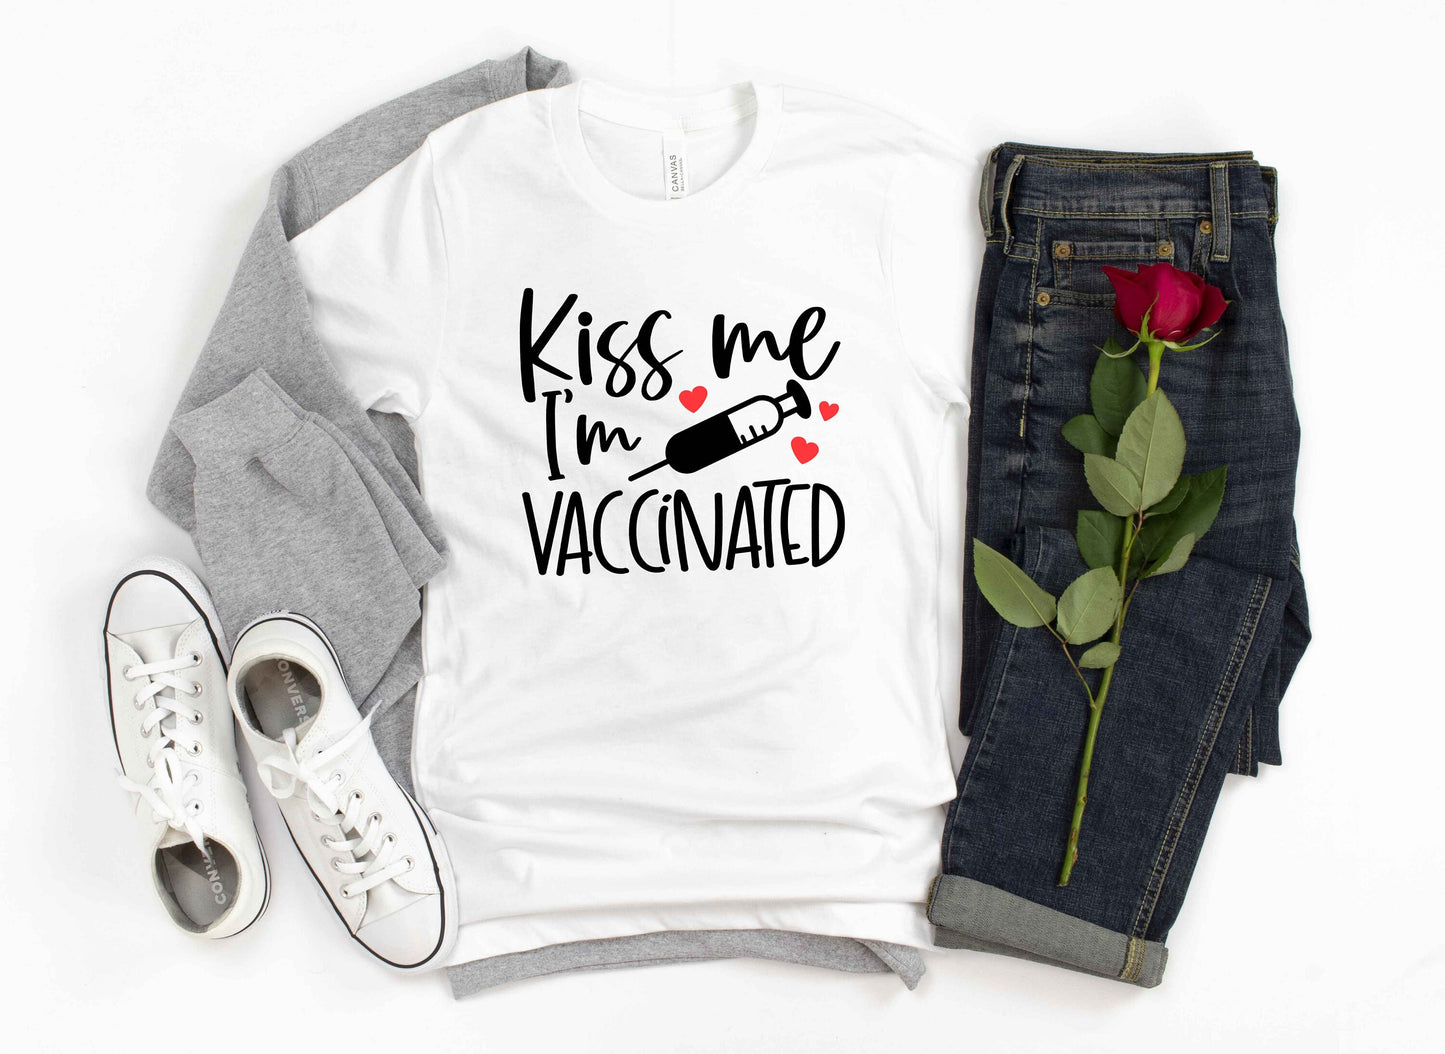 Kiss Me, I'm Vaccinated unisex t-shirt • super soft tees for women • vaccinated shirt • proudly vaccinated